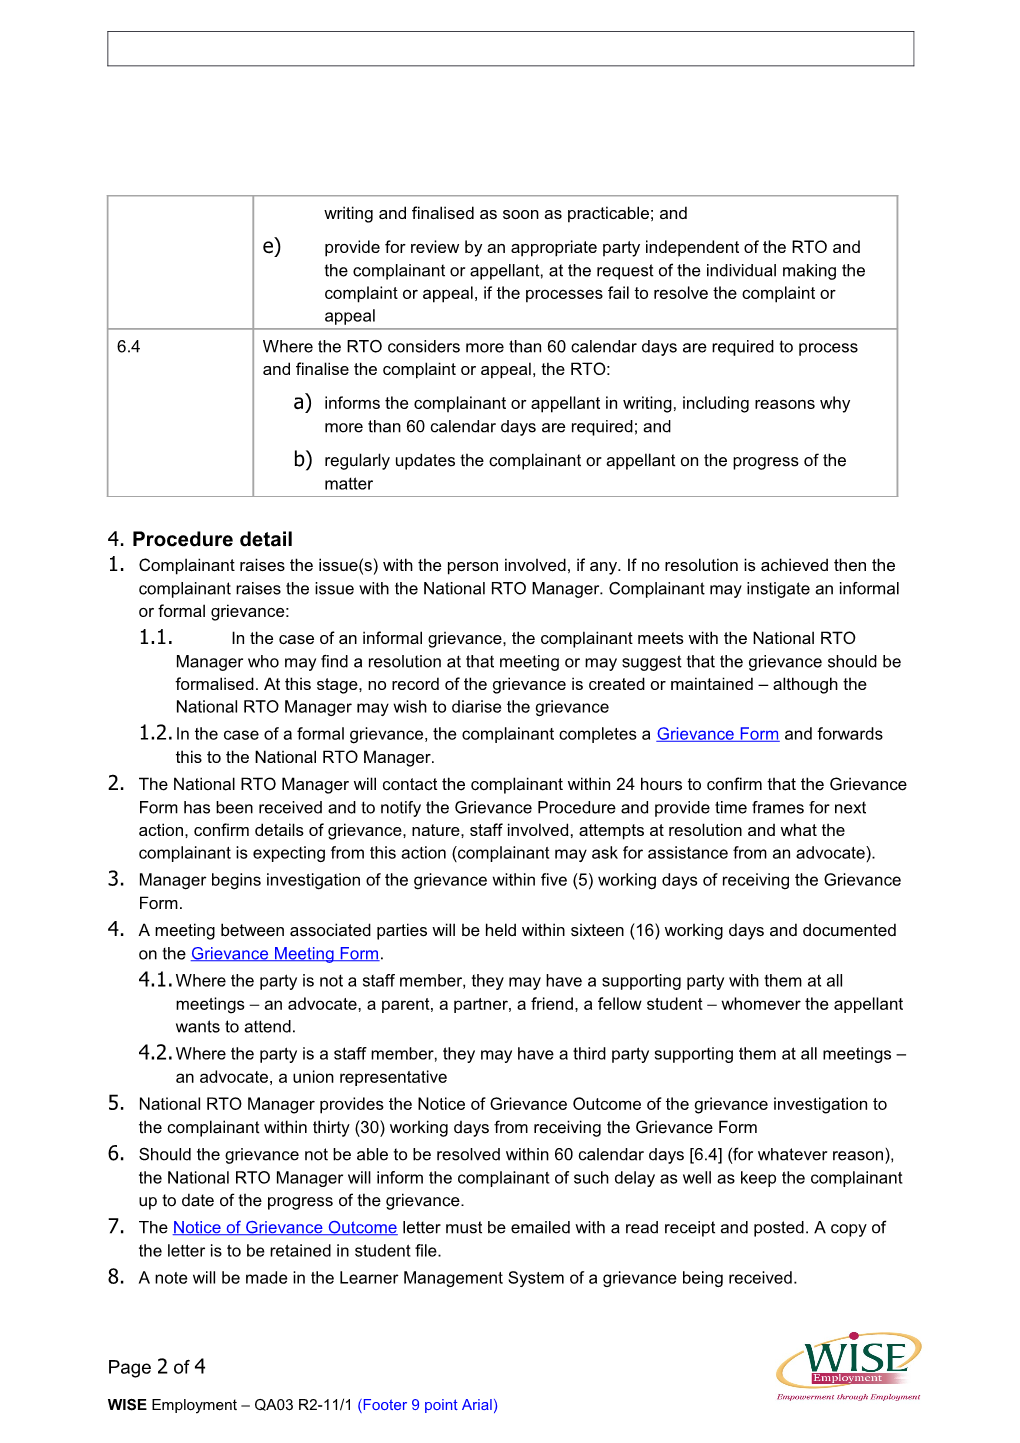 Policy and Procedure Document Template (QA03)